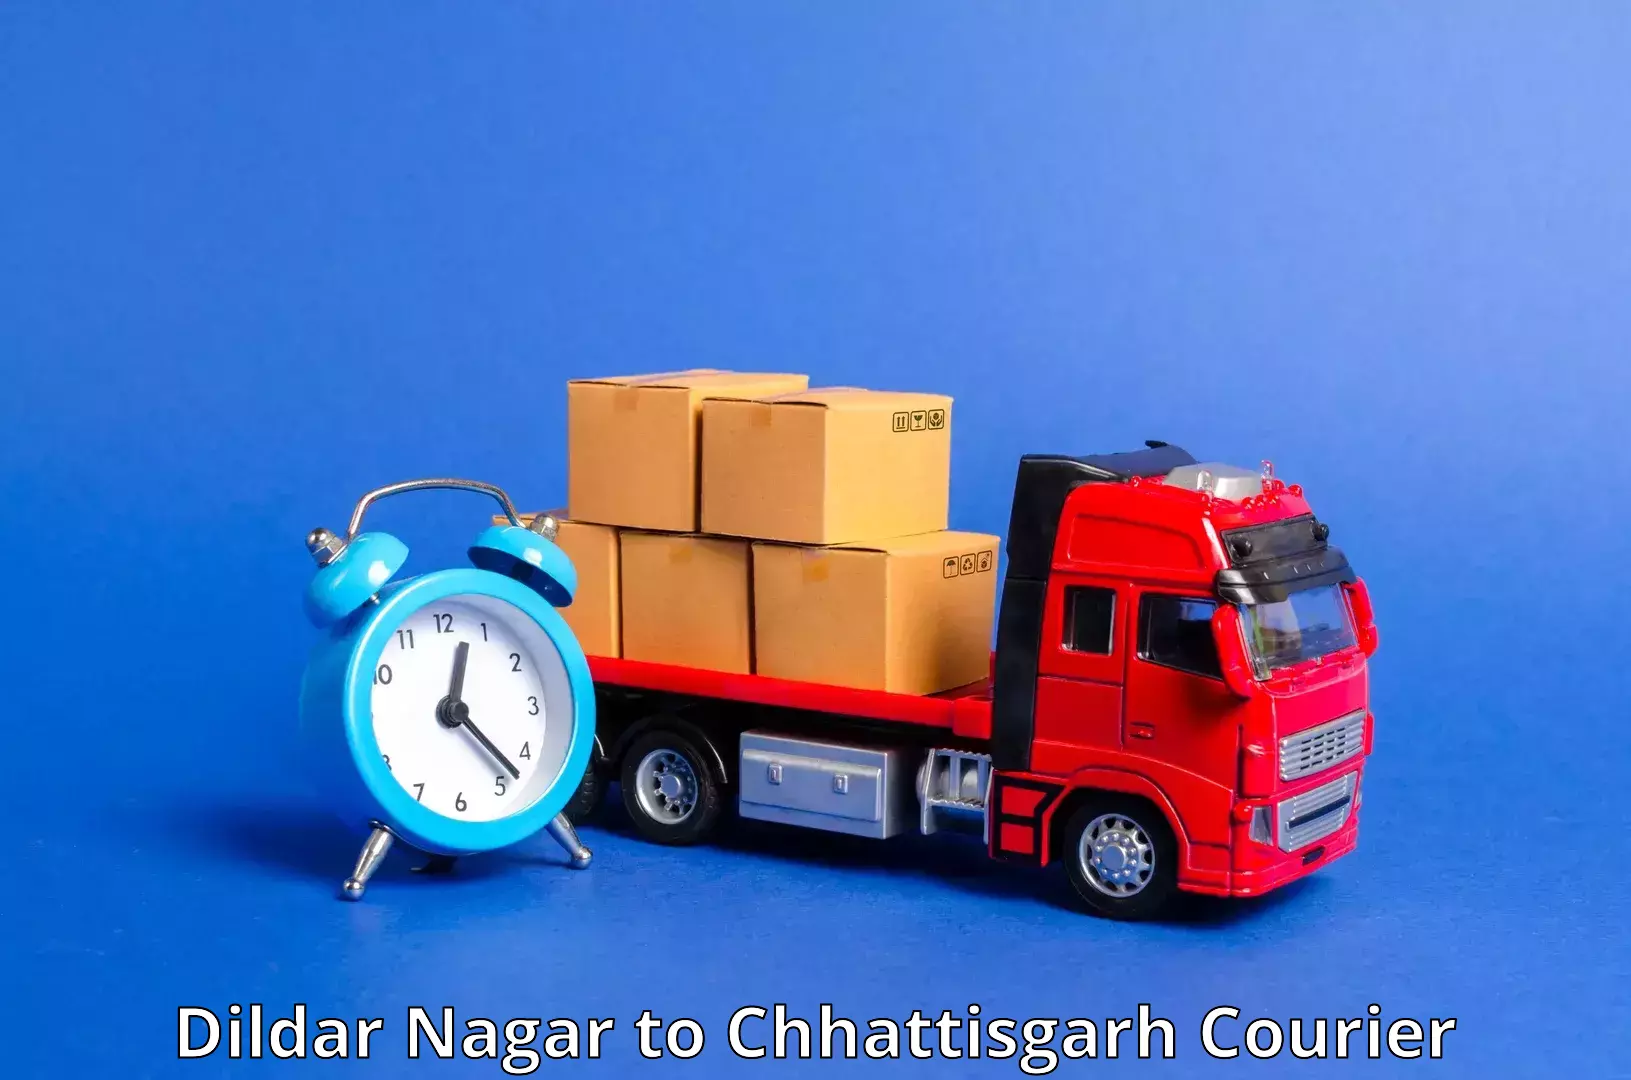 End-to-end delivery in Dildar Nagar to Bijapur Chhattisgarh